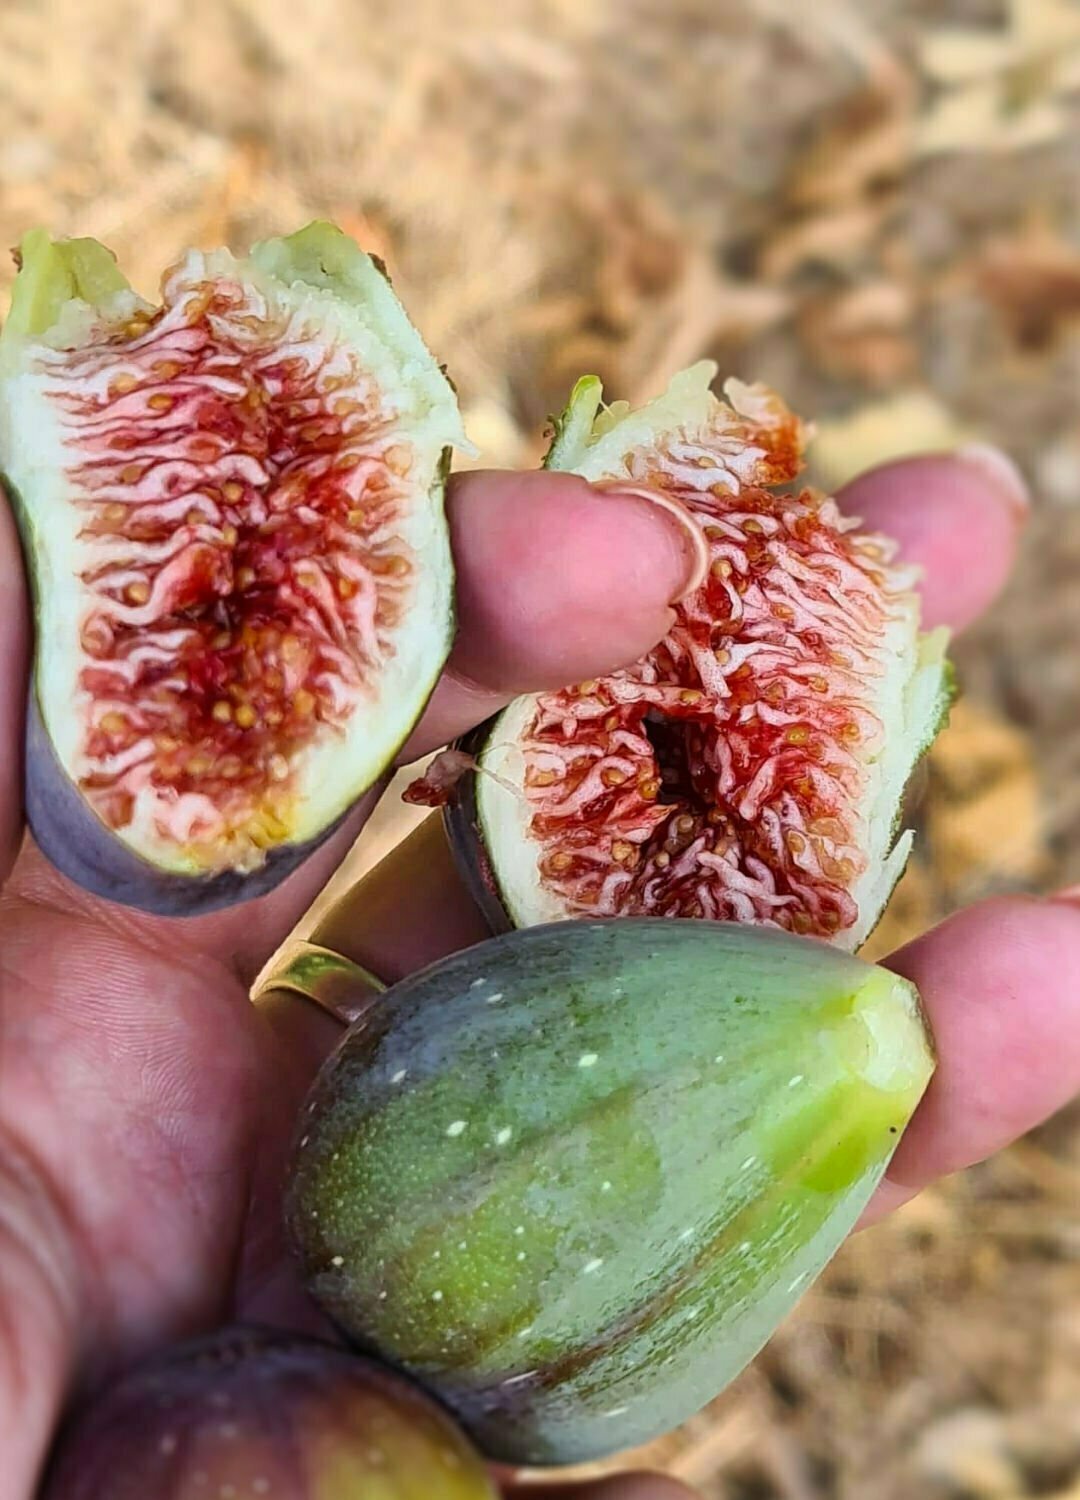 a handful of fresh figs with one broken open exposing the red flesh and flower of the fig